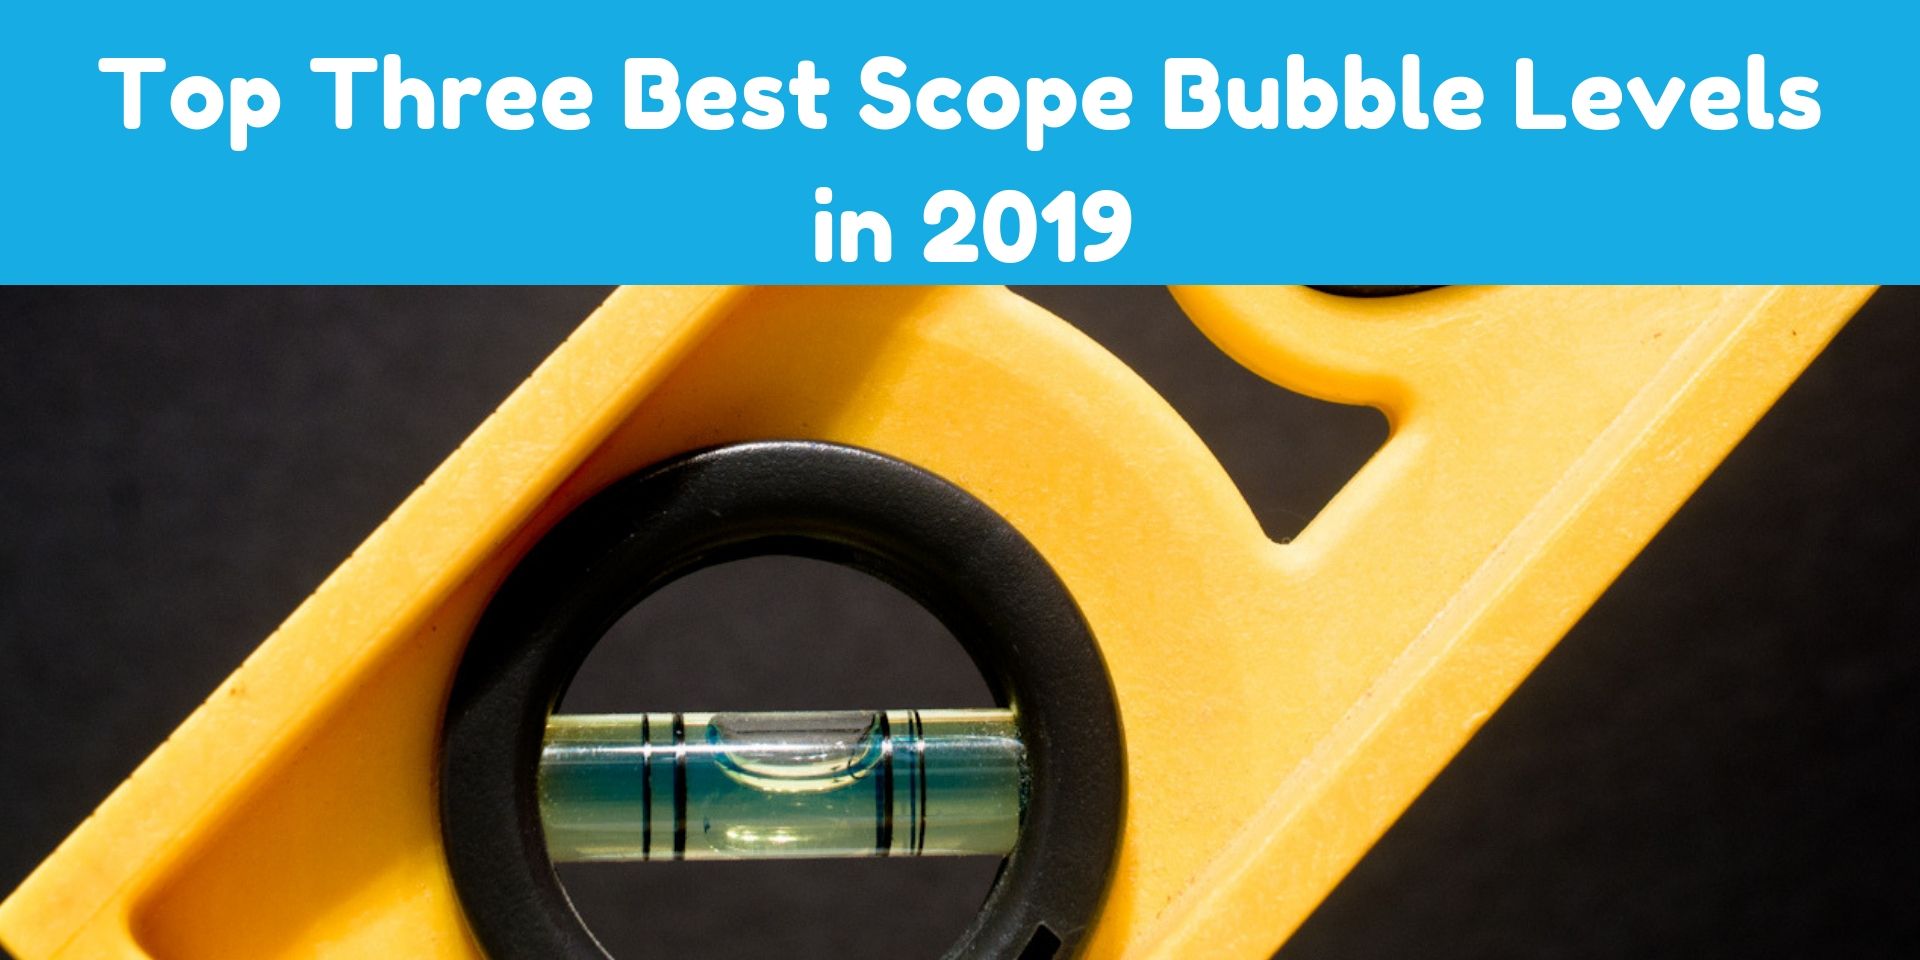 Top Three Best Scope Bubble Levels in 2019